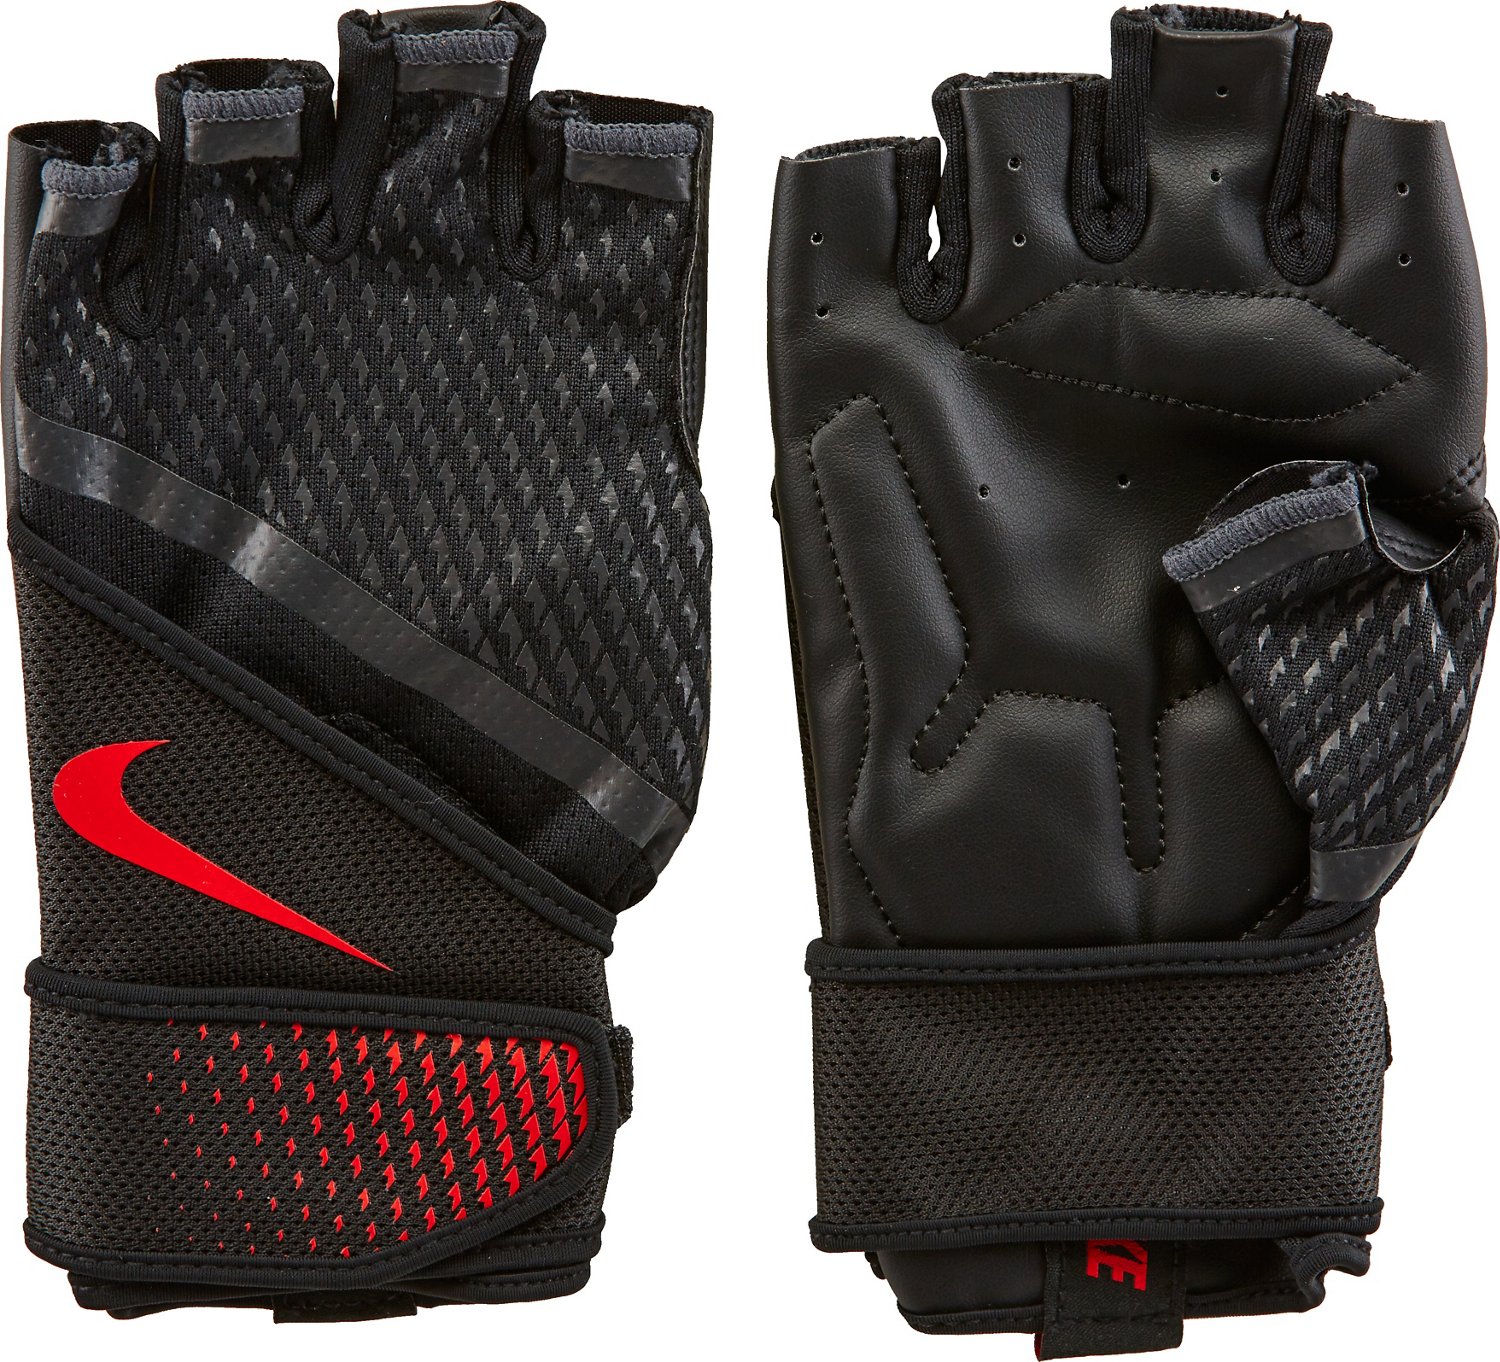 63 Recomended Academy workout gloves with Machine